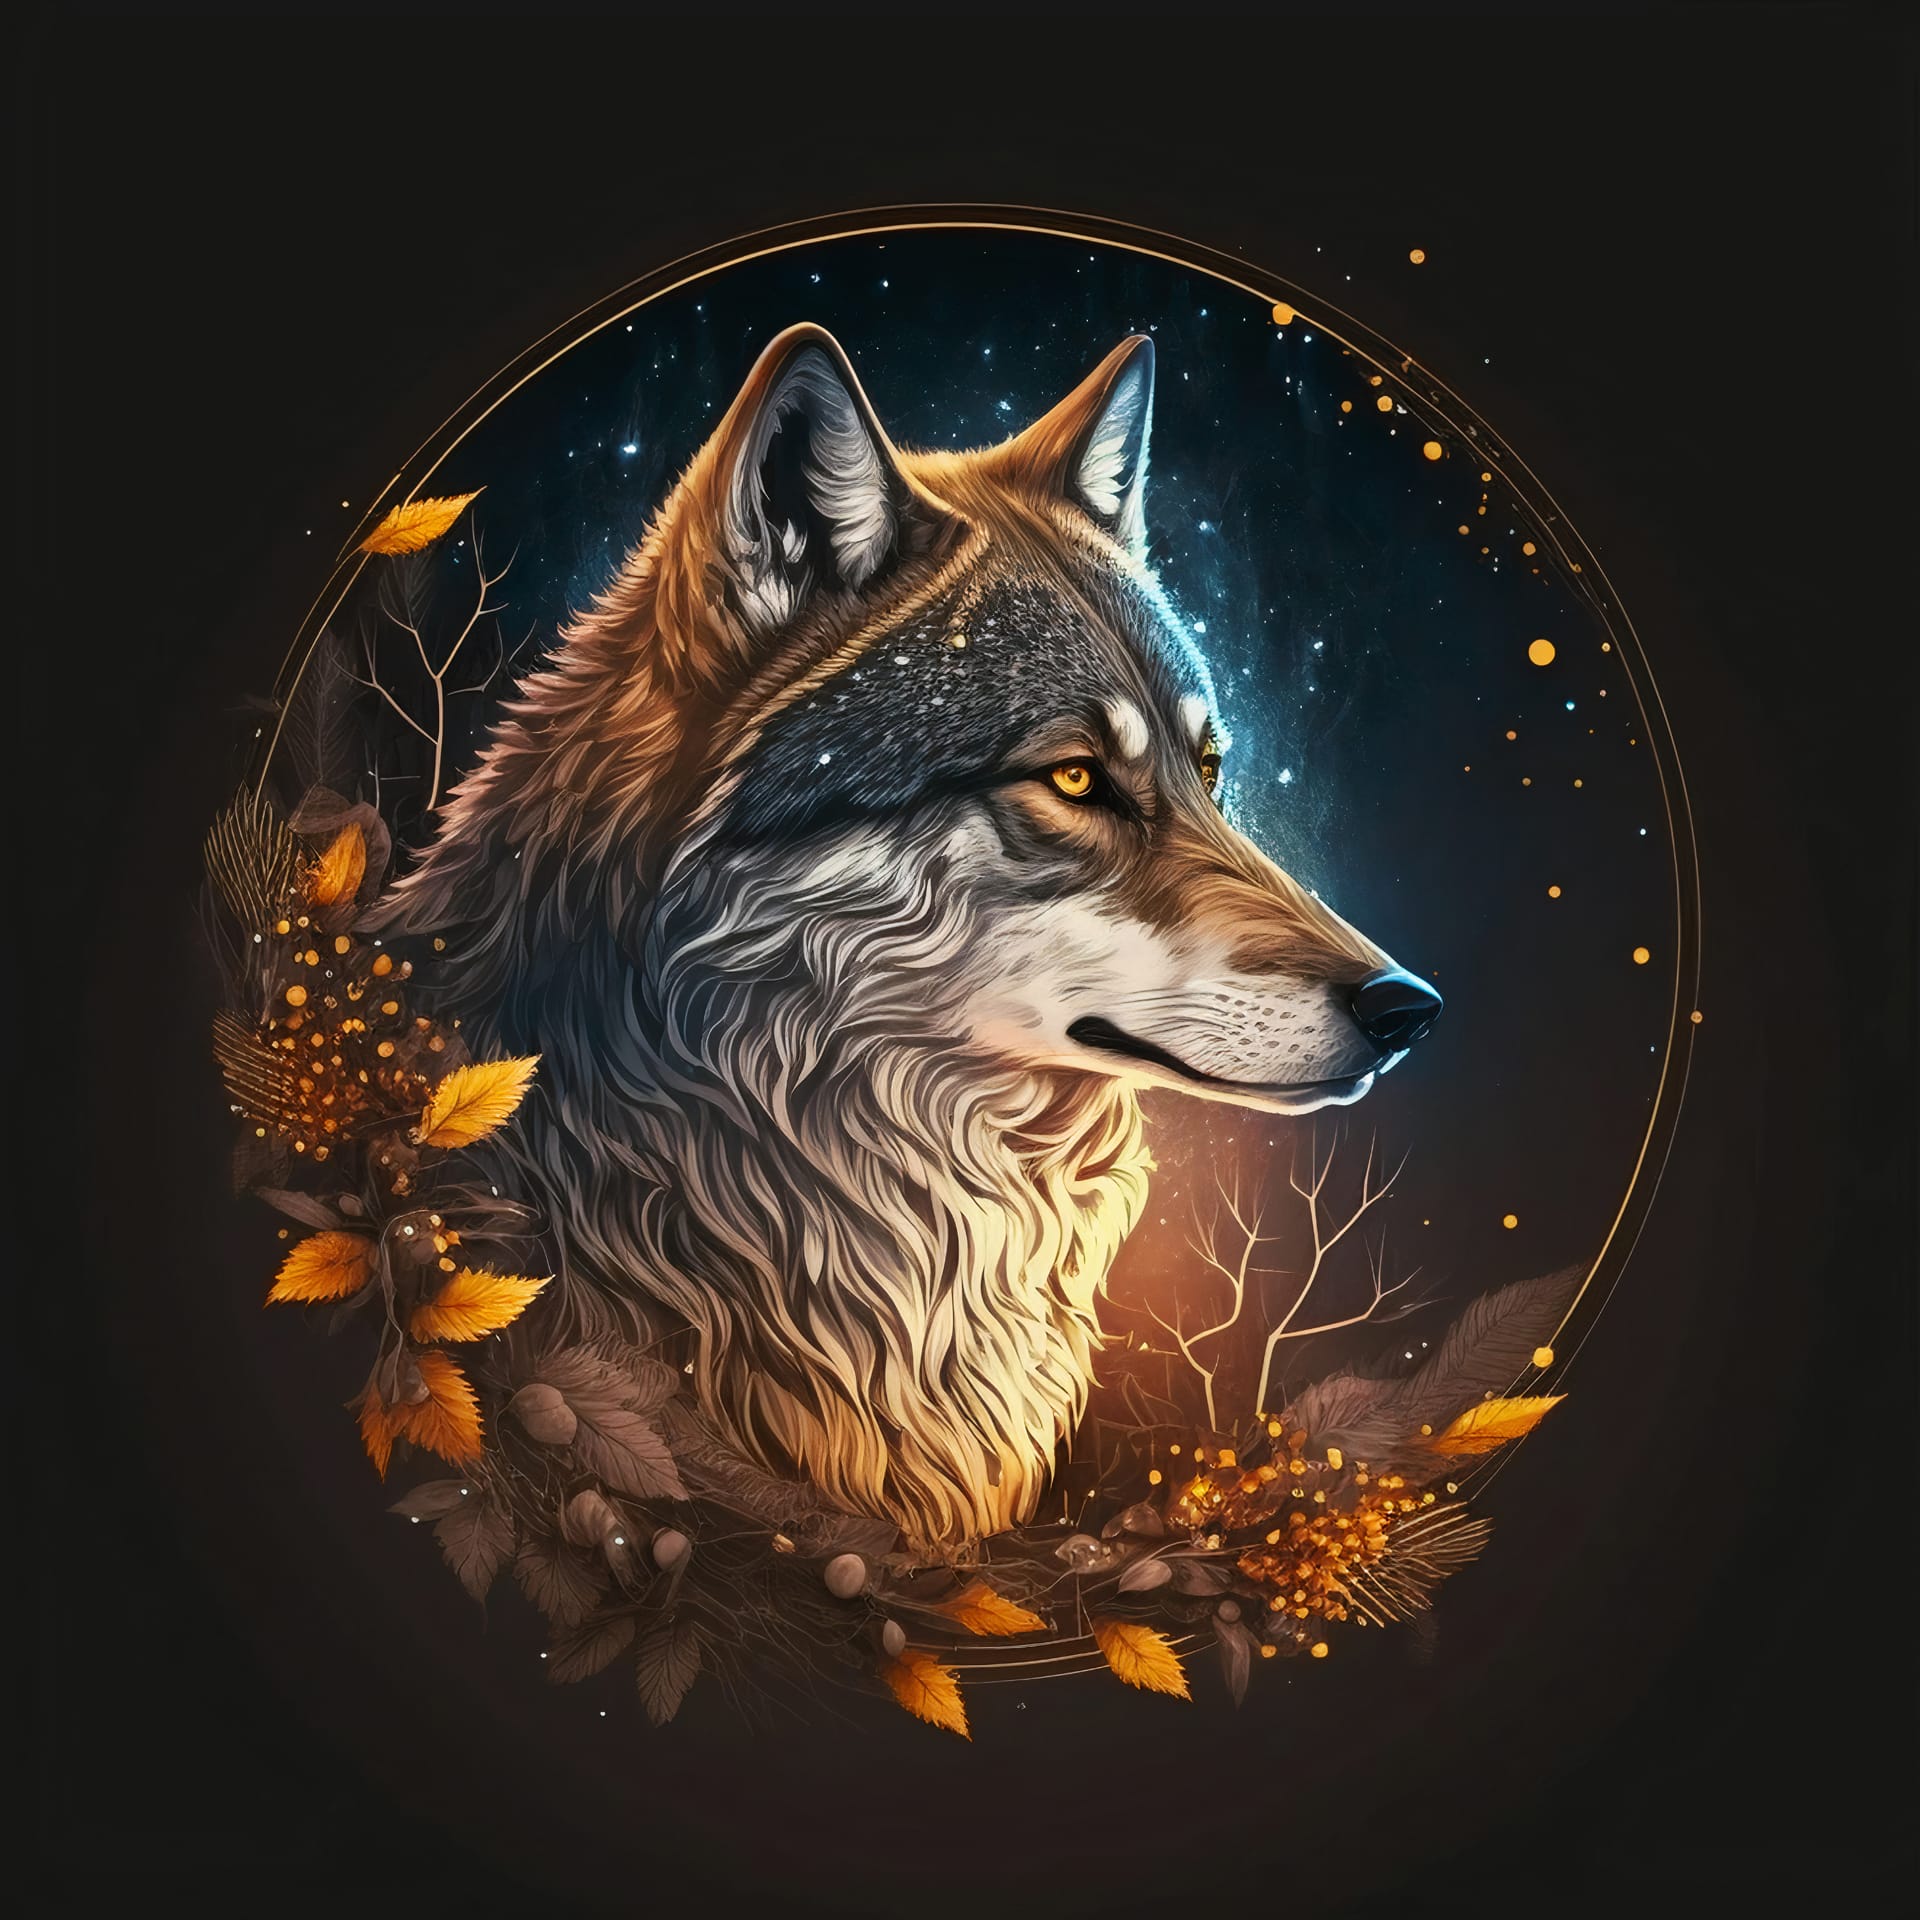 Illustration front view wolf head surprisingly perfect design excellent picture